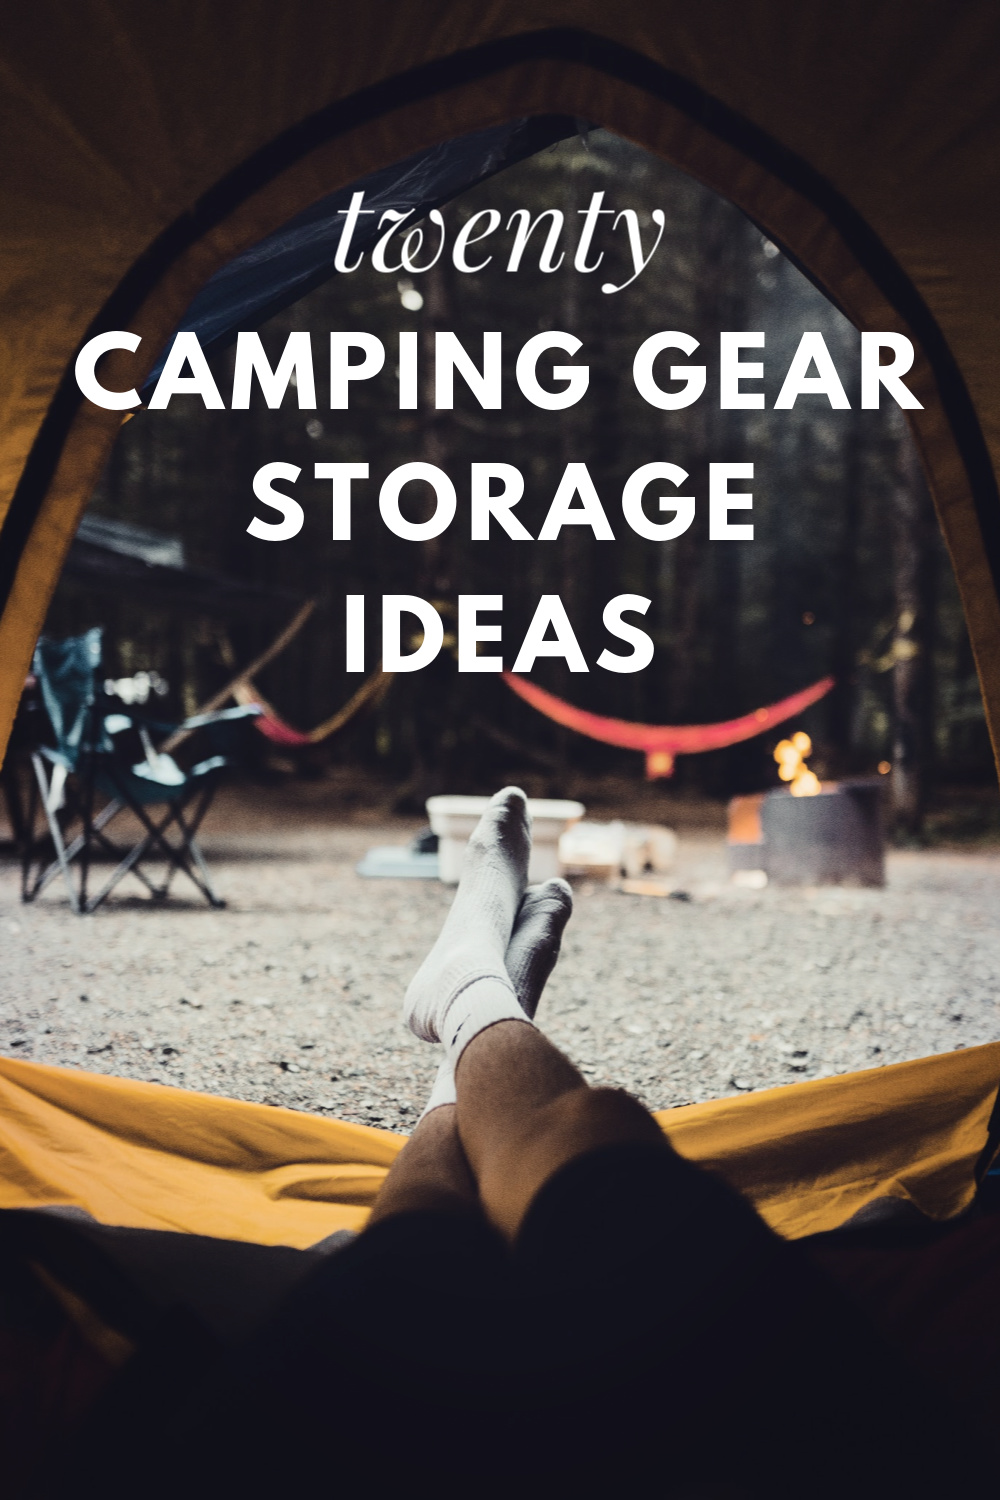 https://www.frugallivingnw.com/wp-content/uploads/2019/04/how-to-store-camping-gear.jpg